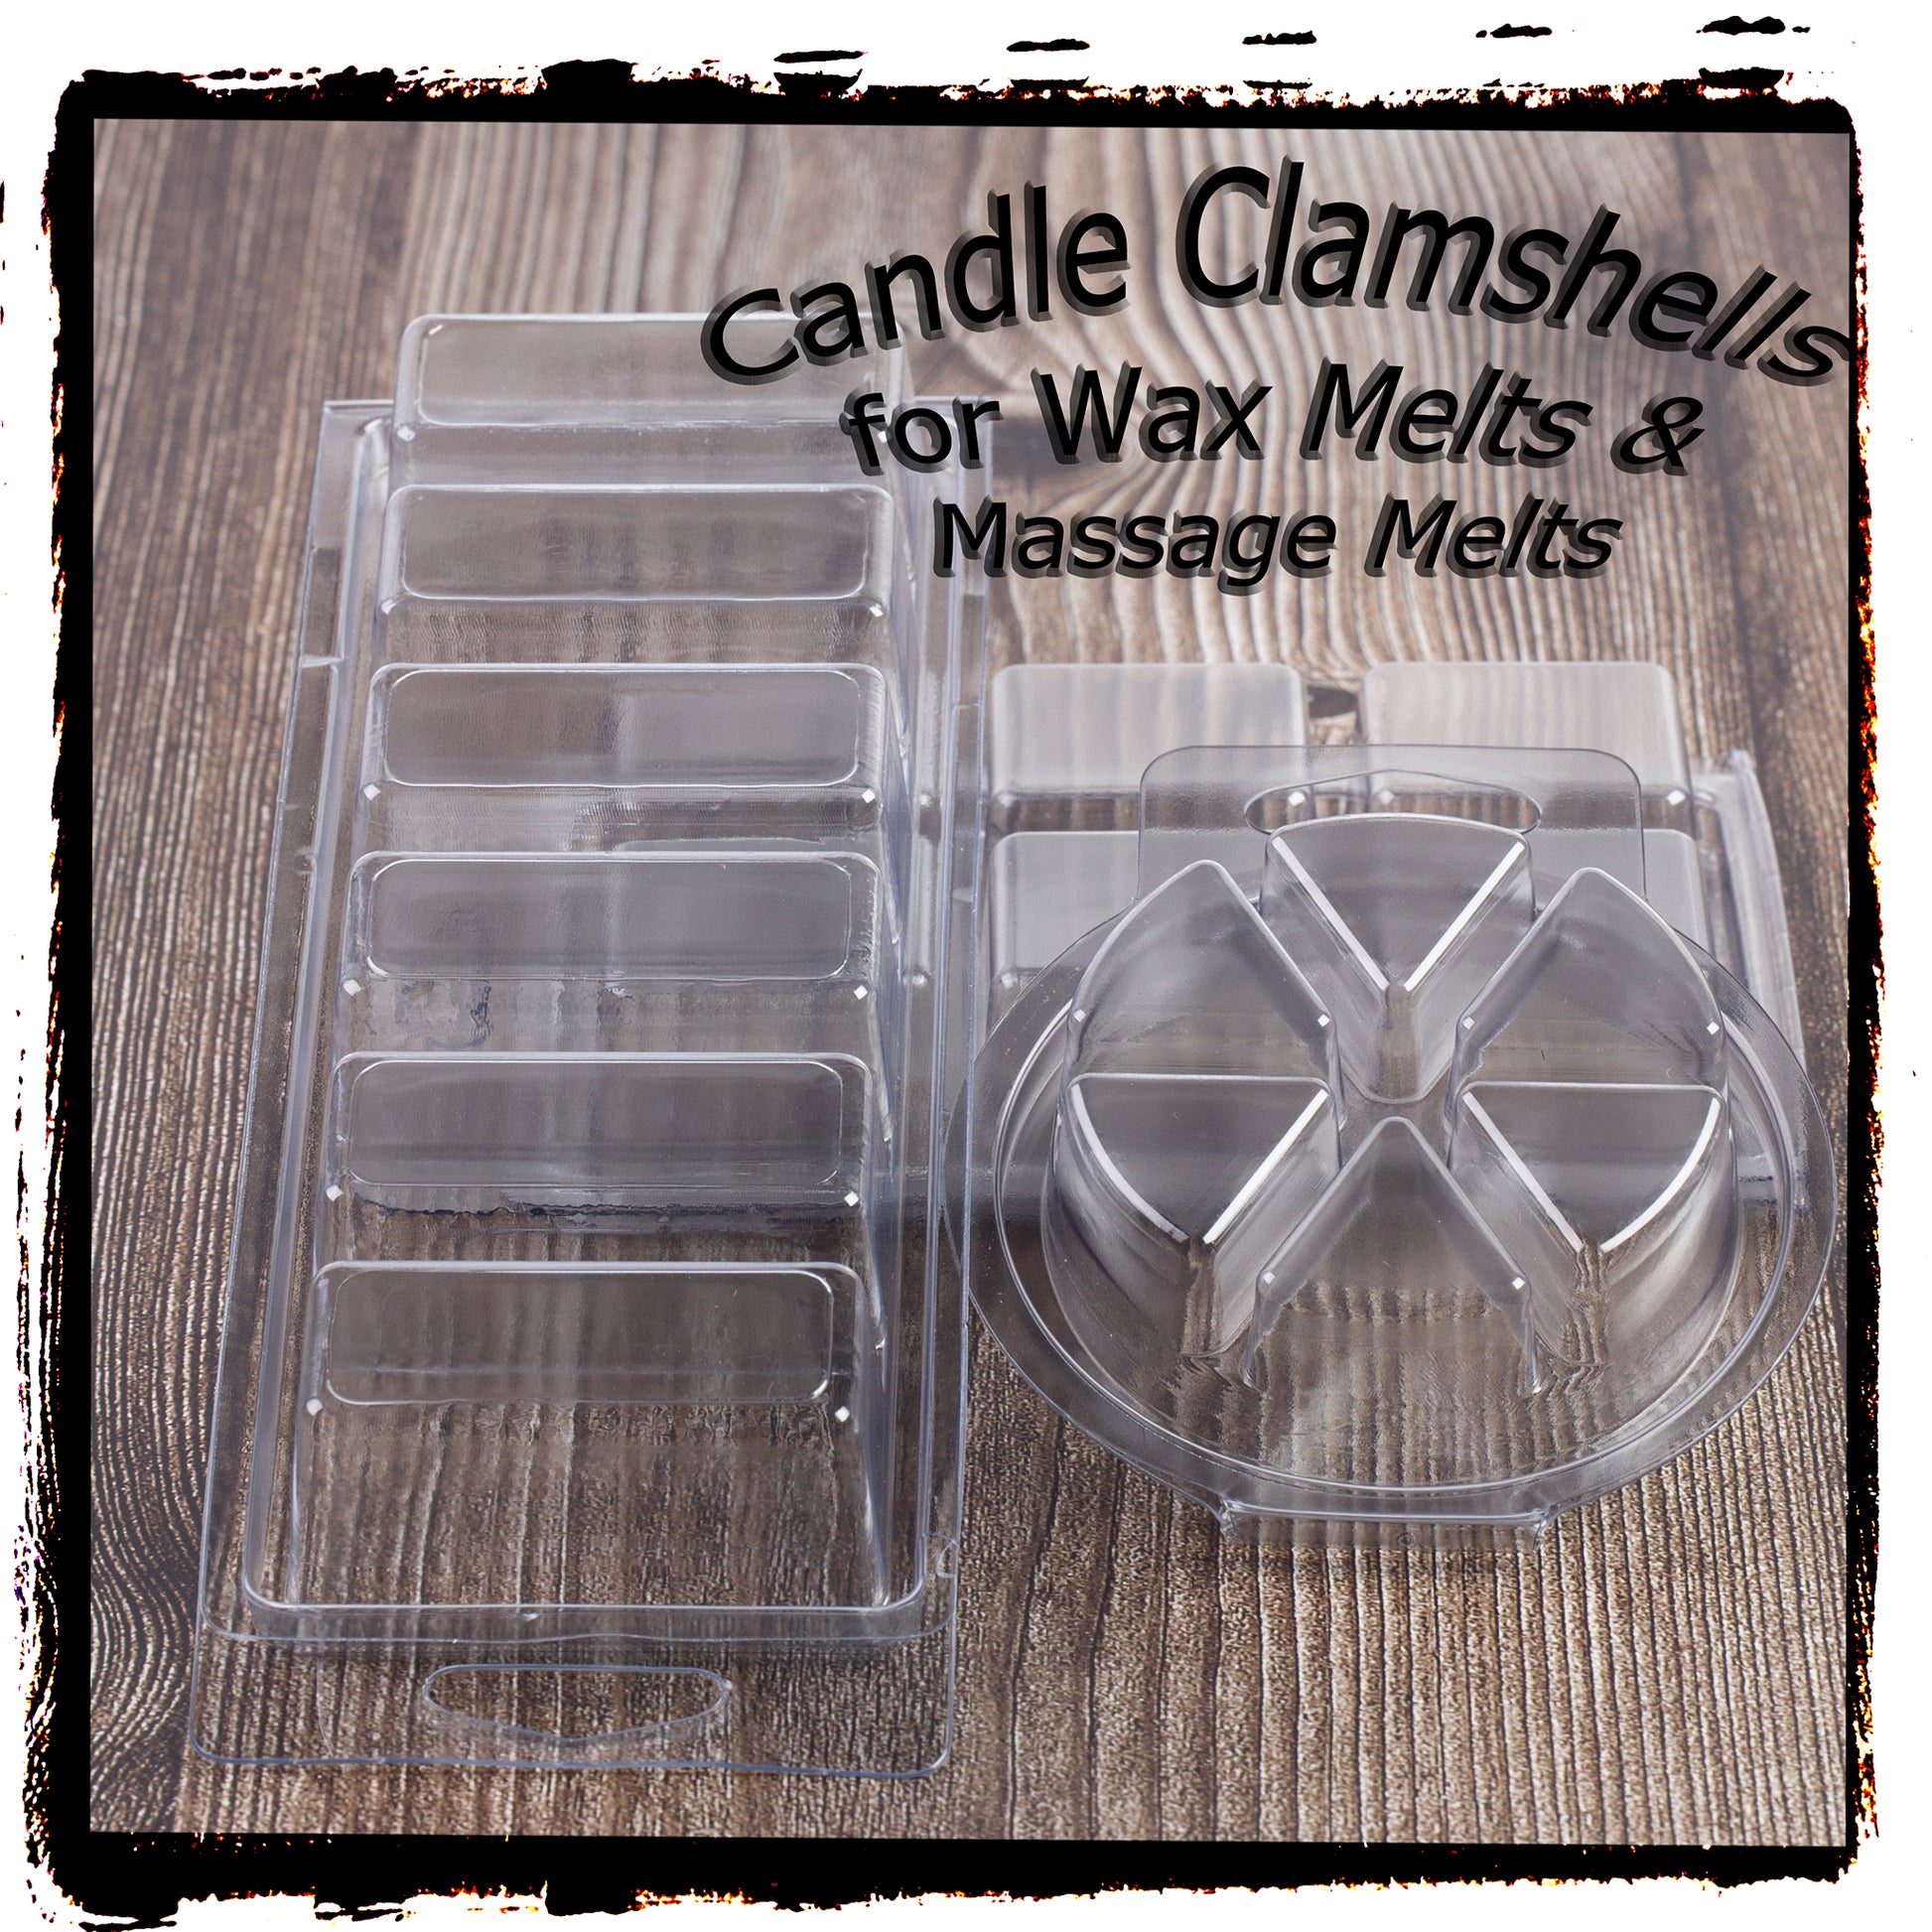 Clamshell Packaging for Wax Melts - ​Ningbo Efine Plastic